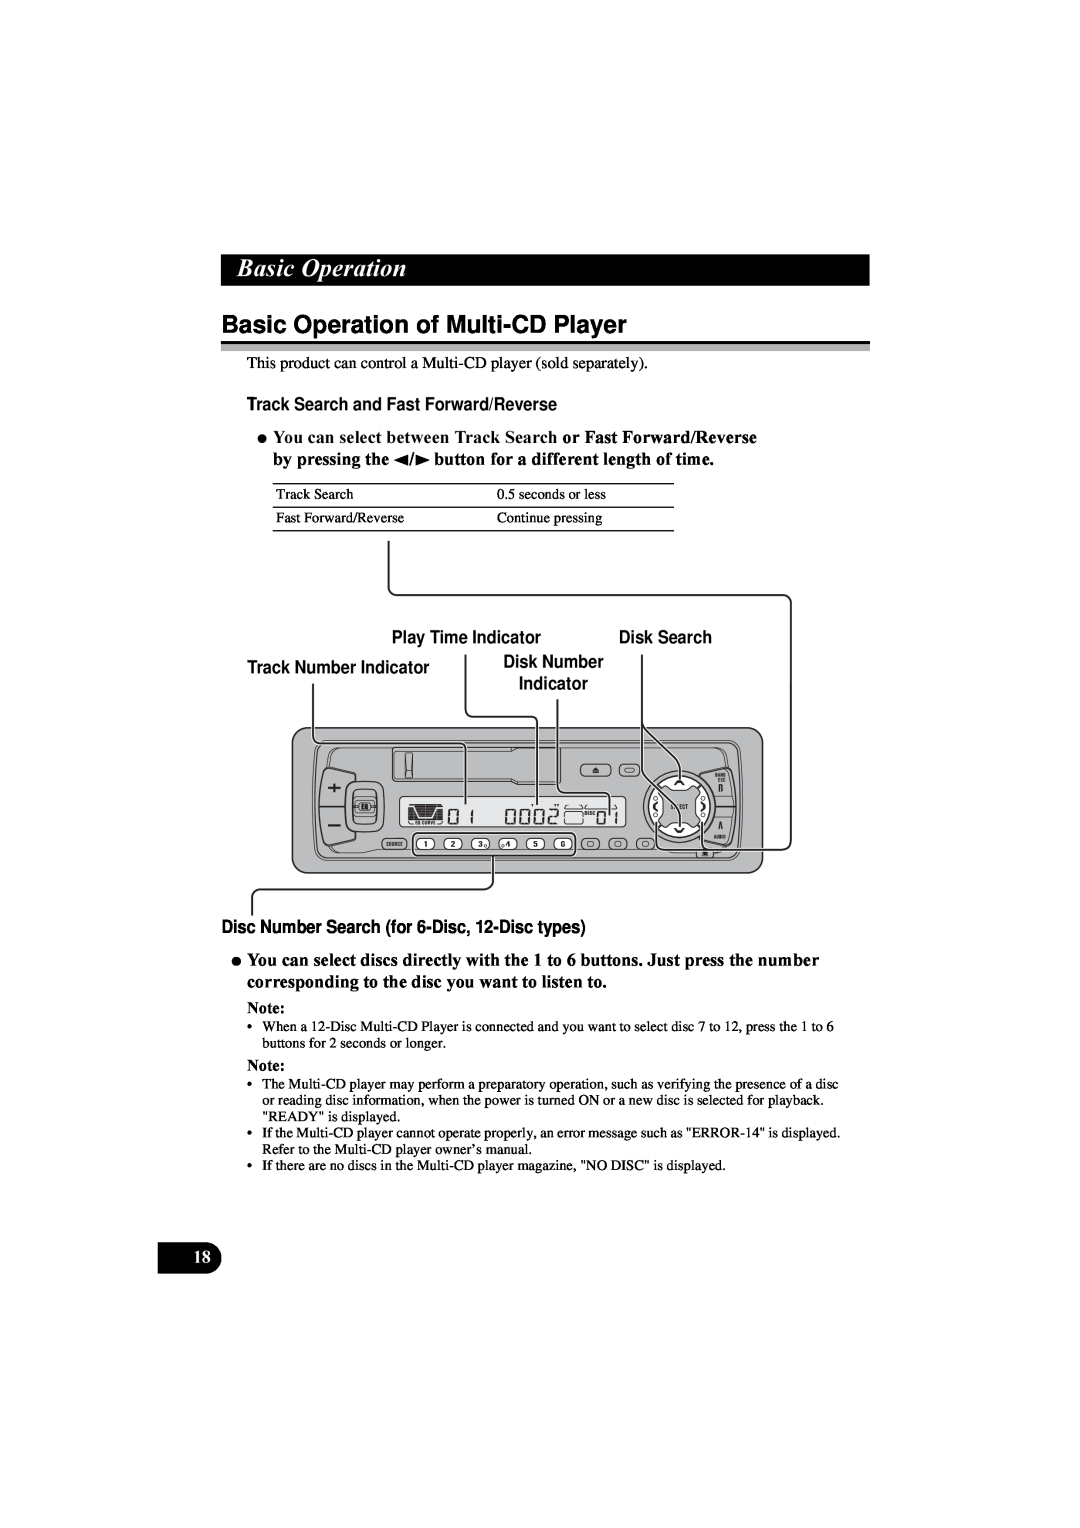 Pioneer KEH-P5900R manual Basic Operation of Multi-CD Player, Track Search and Fast Forward/Reverse, Track Number Indicator 